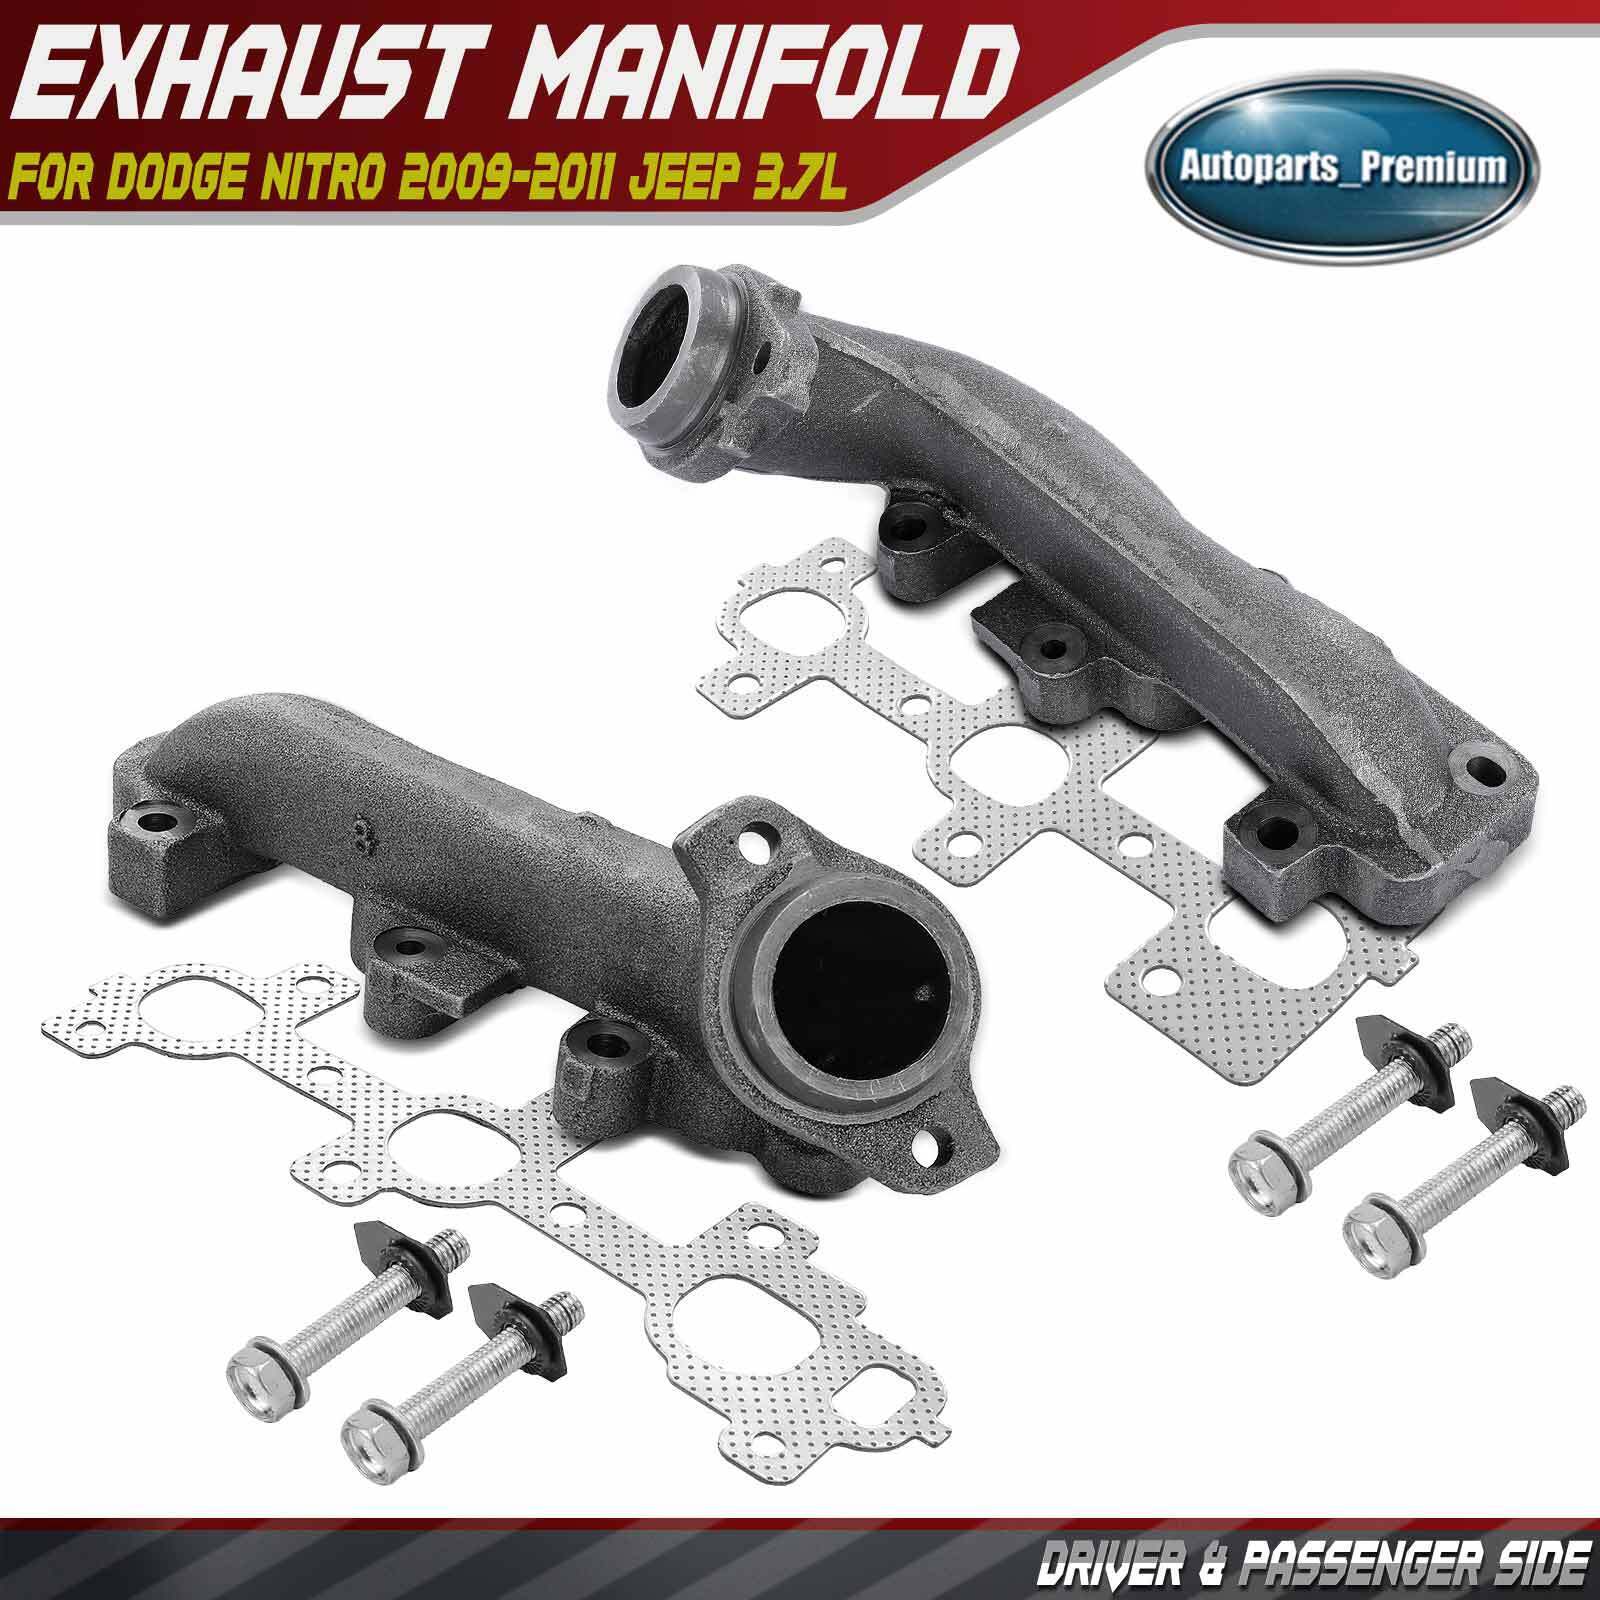 Left & Right Exhaust Manifold w/ Gasket Kit for Dodge Nitro 2009-2011 Jeep 3.7L